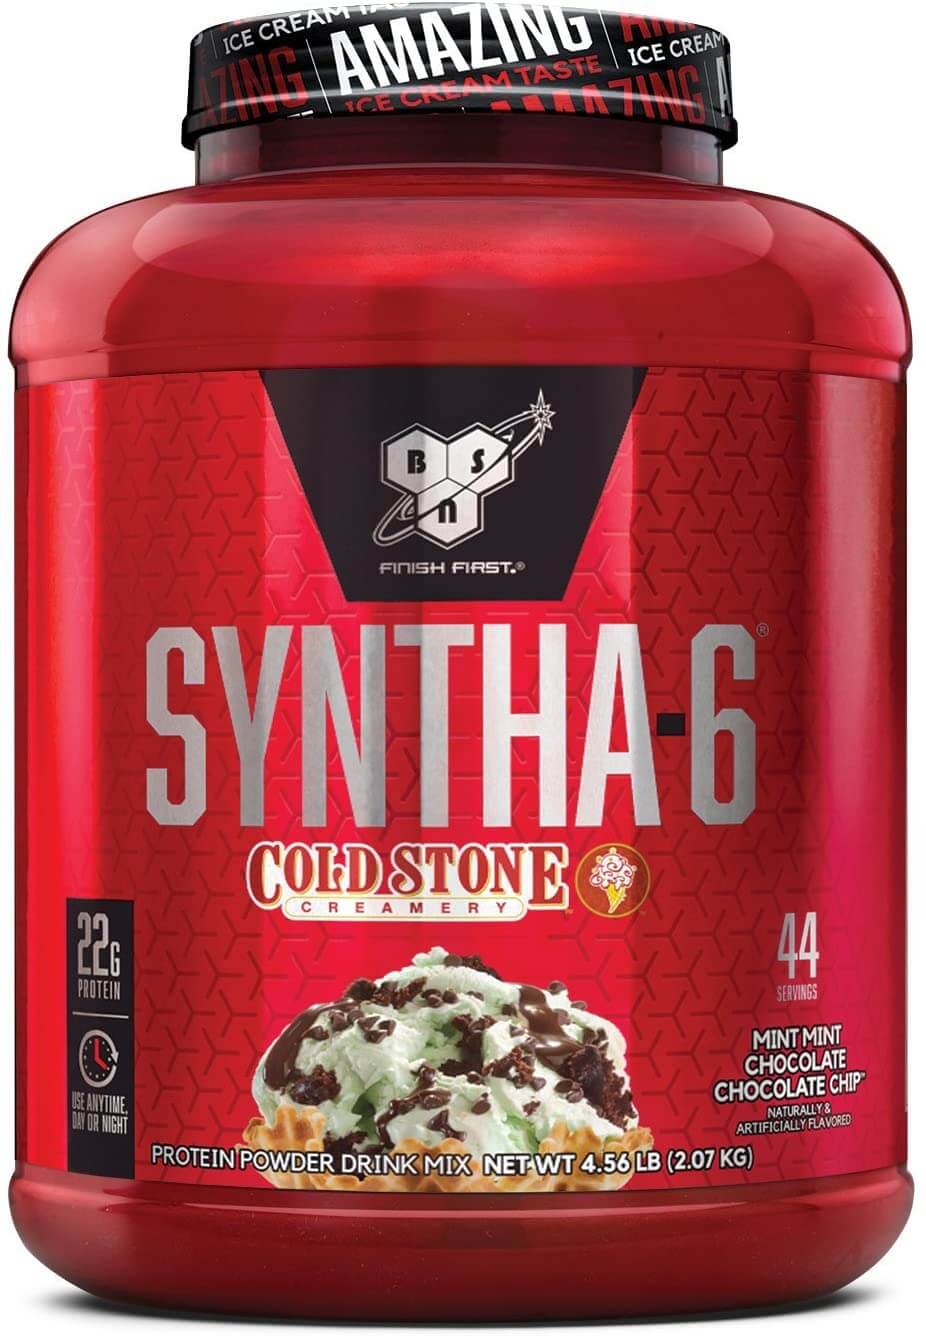 Bsn Syntha-6 Cold Stone Creamery Protein Powder Drink Mix